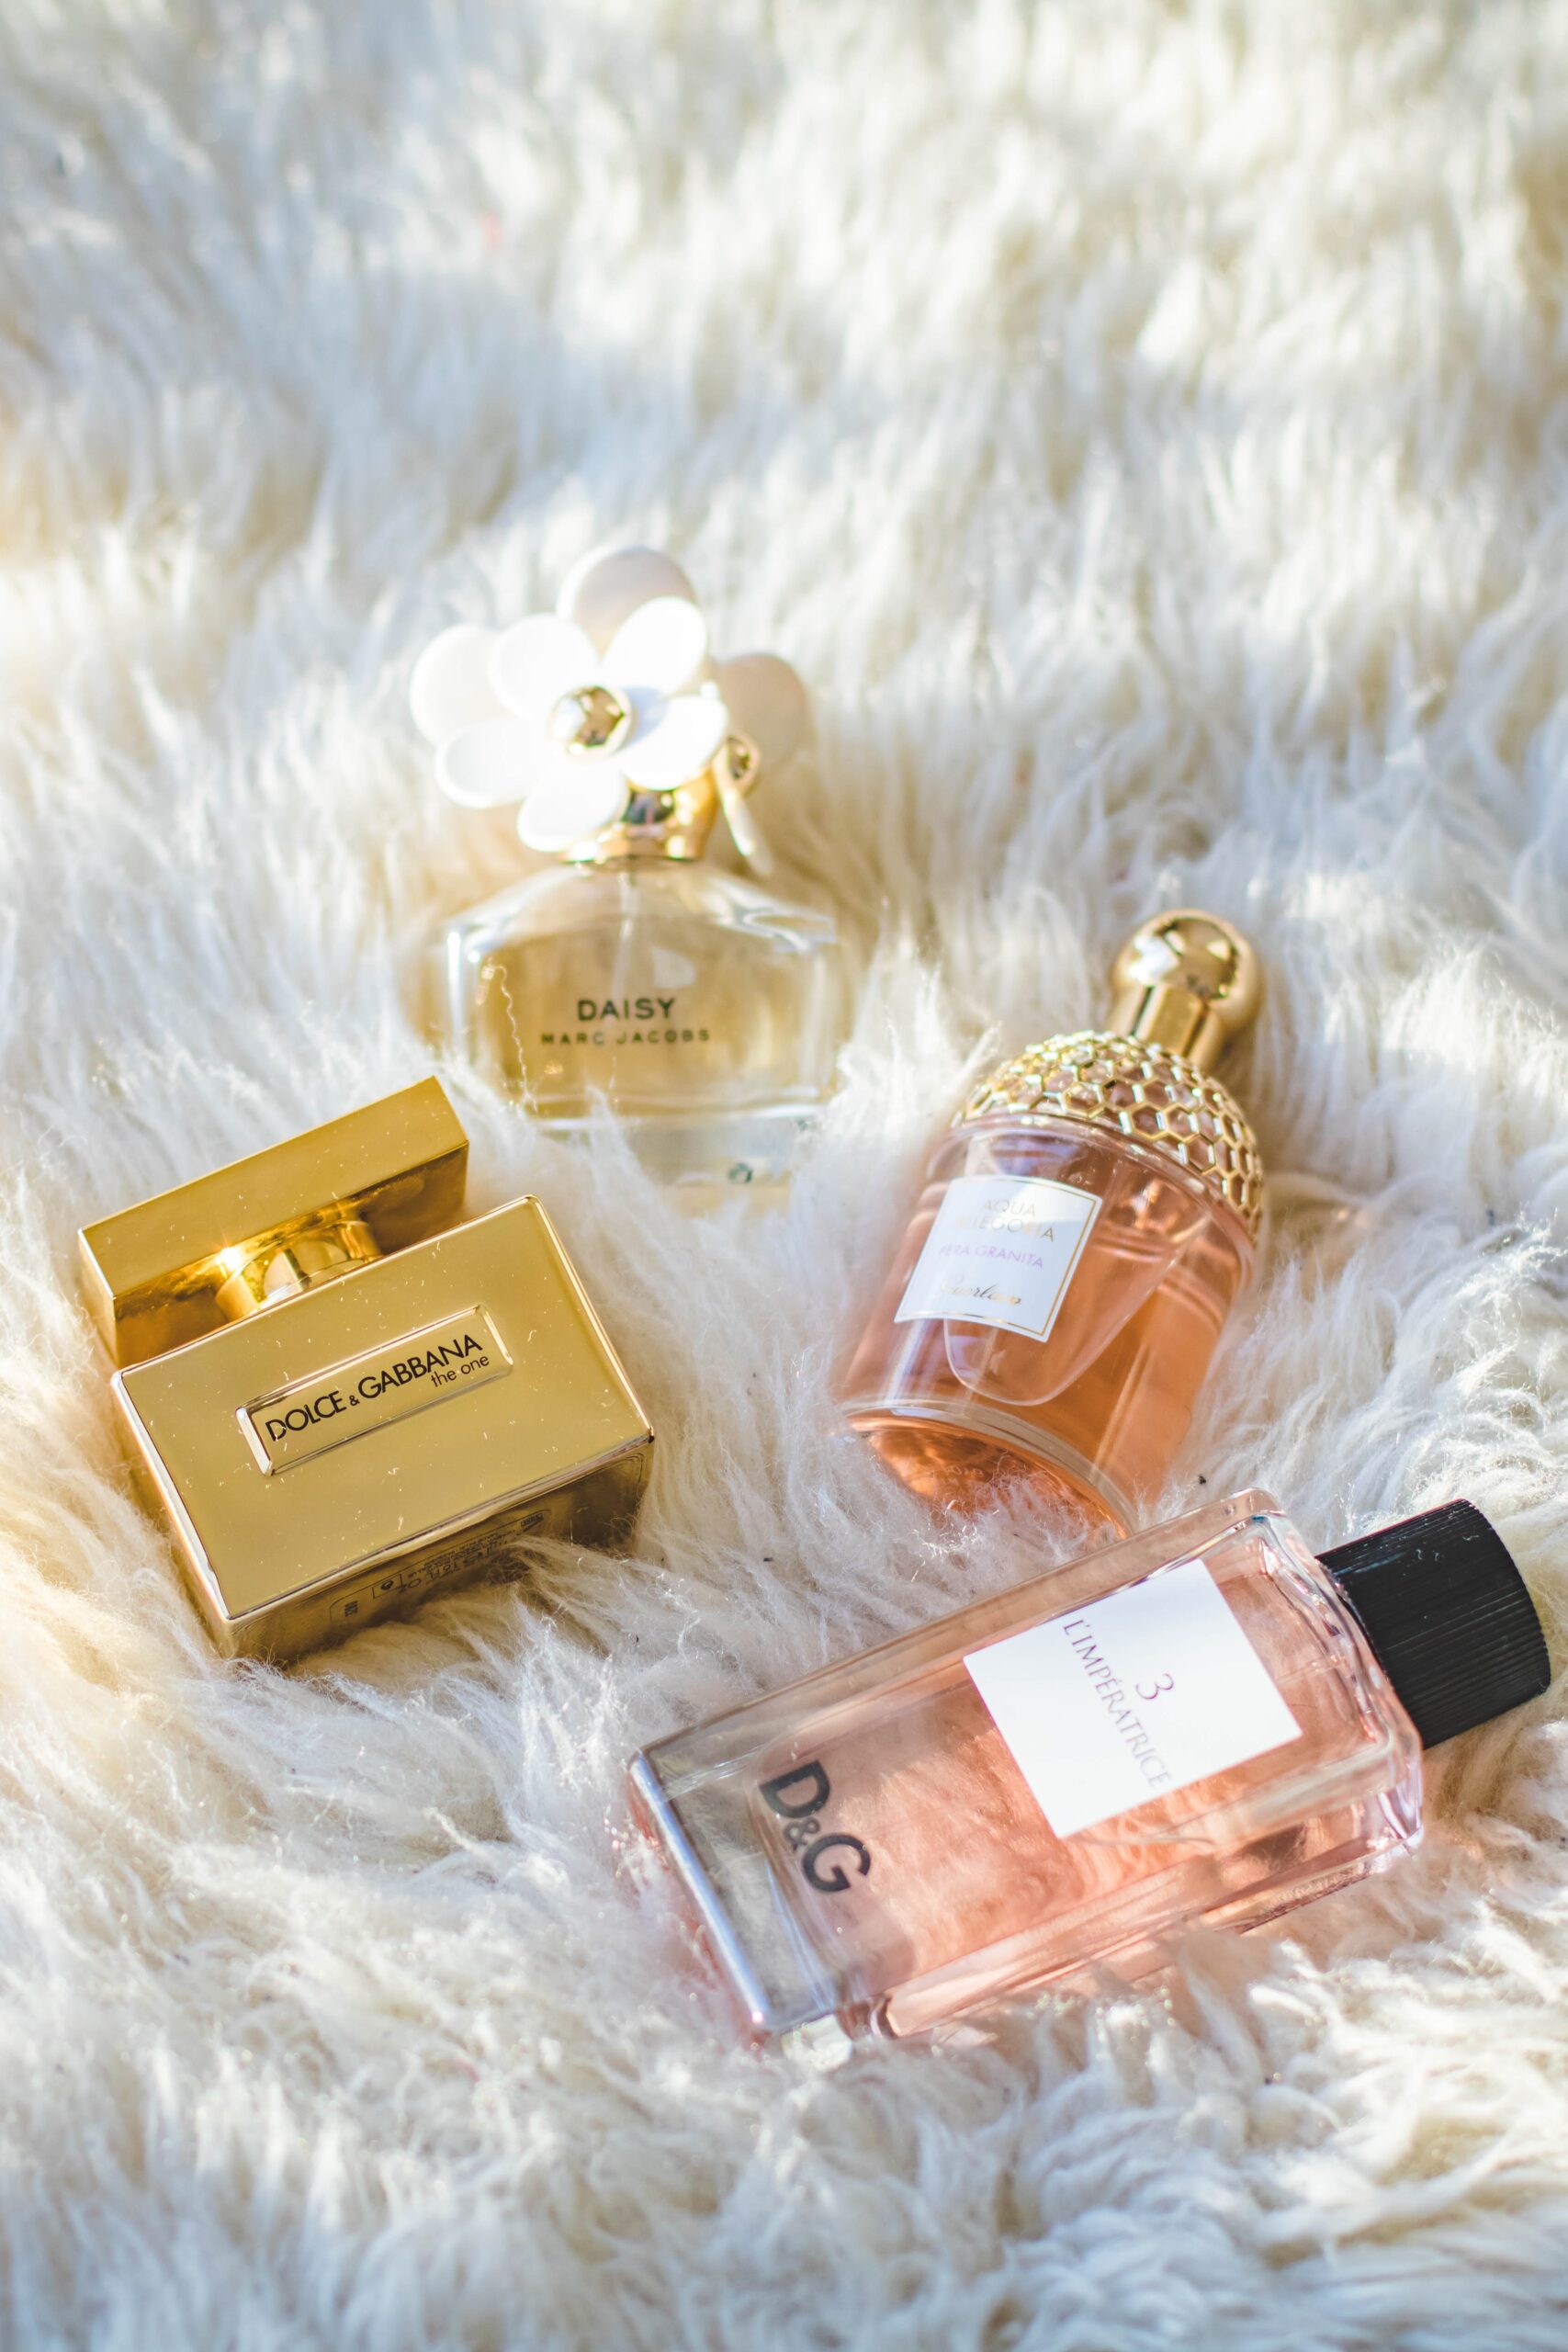 Four bottles of perfume lying on a white textured background.